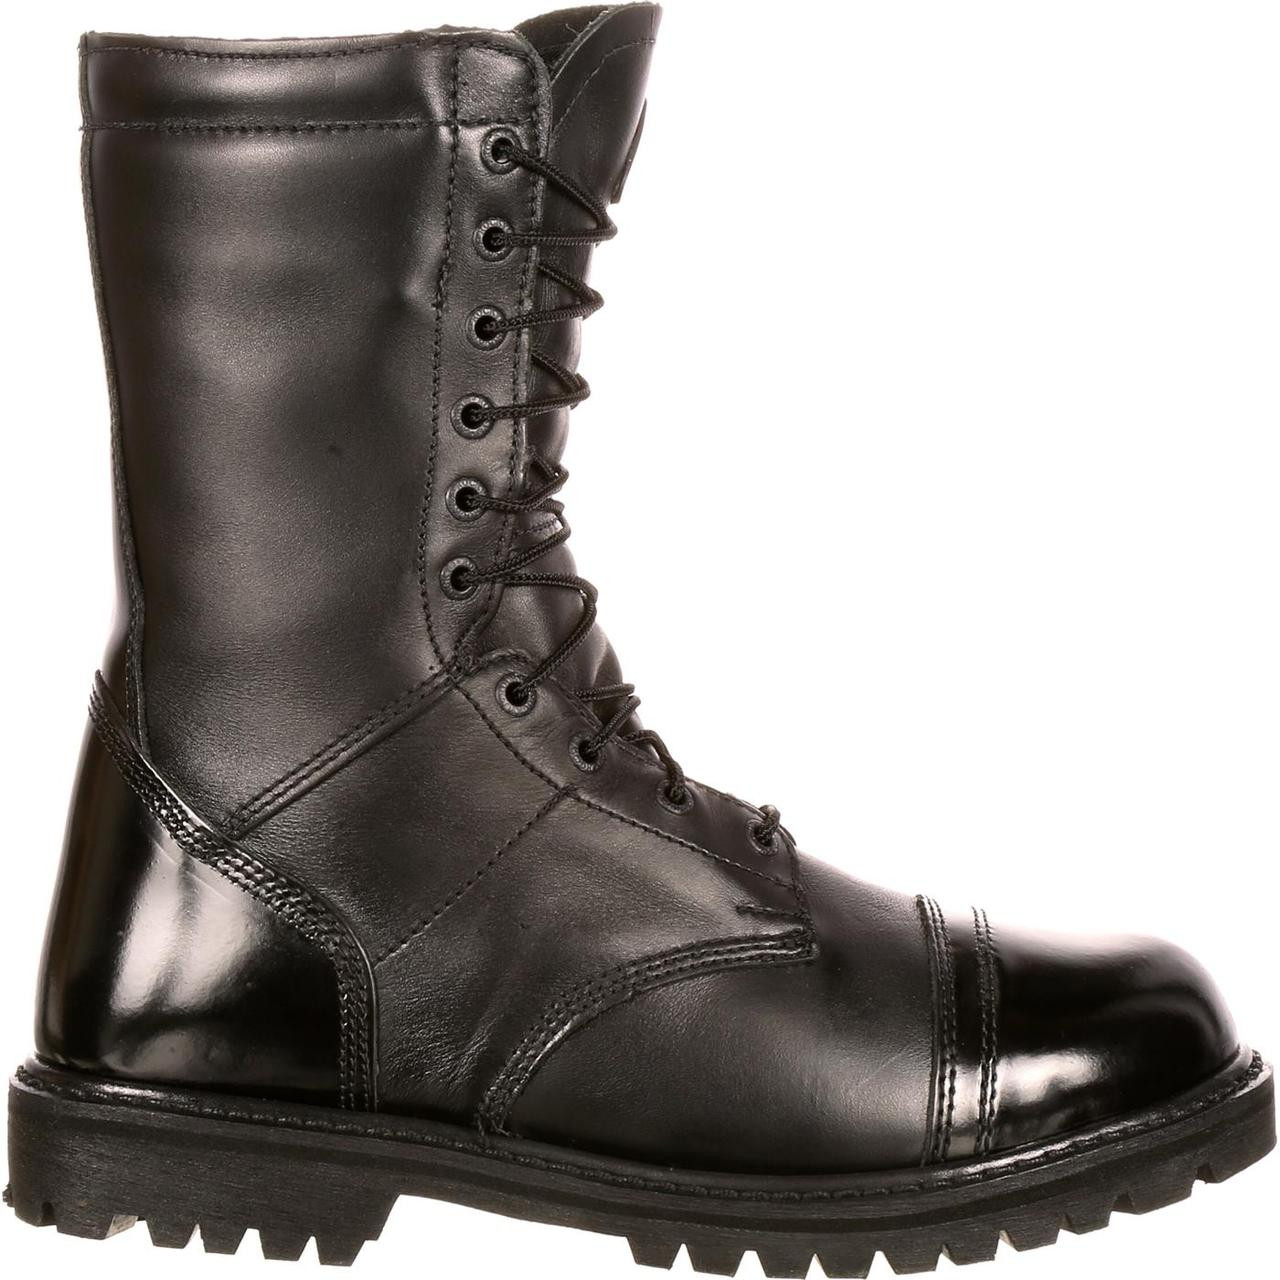 Rocky Waterproof Insulated Side Zip Military Jump Boots Black